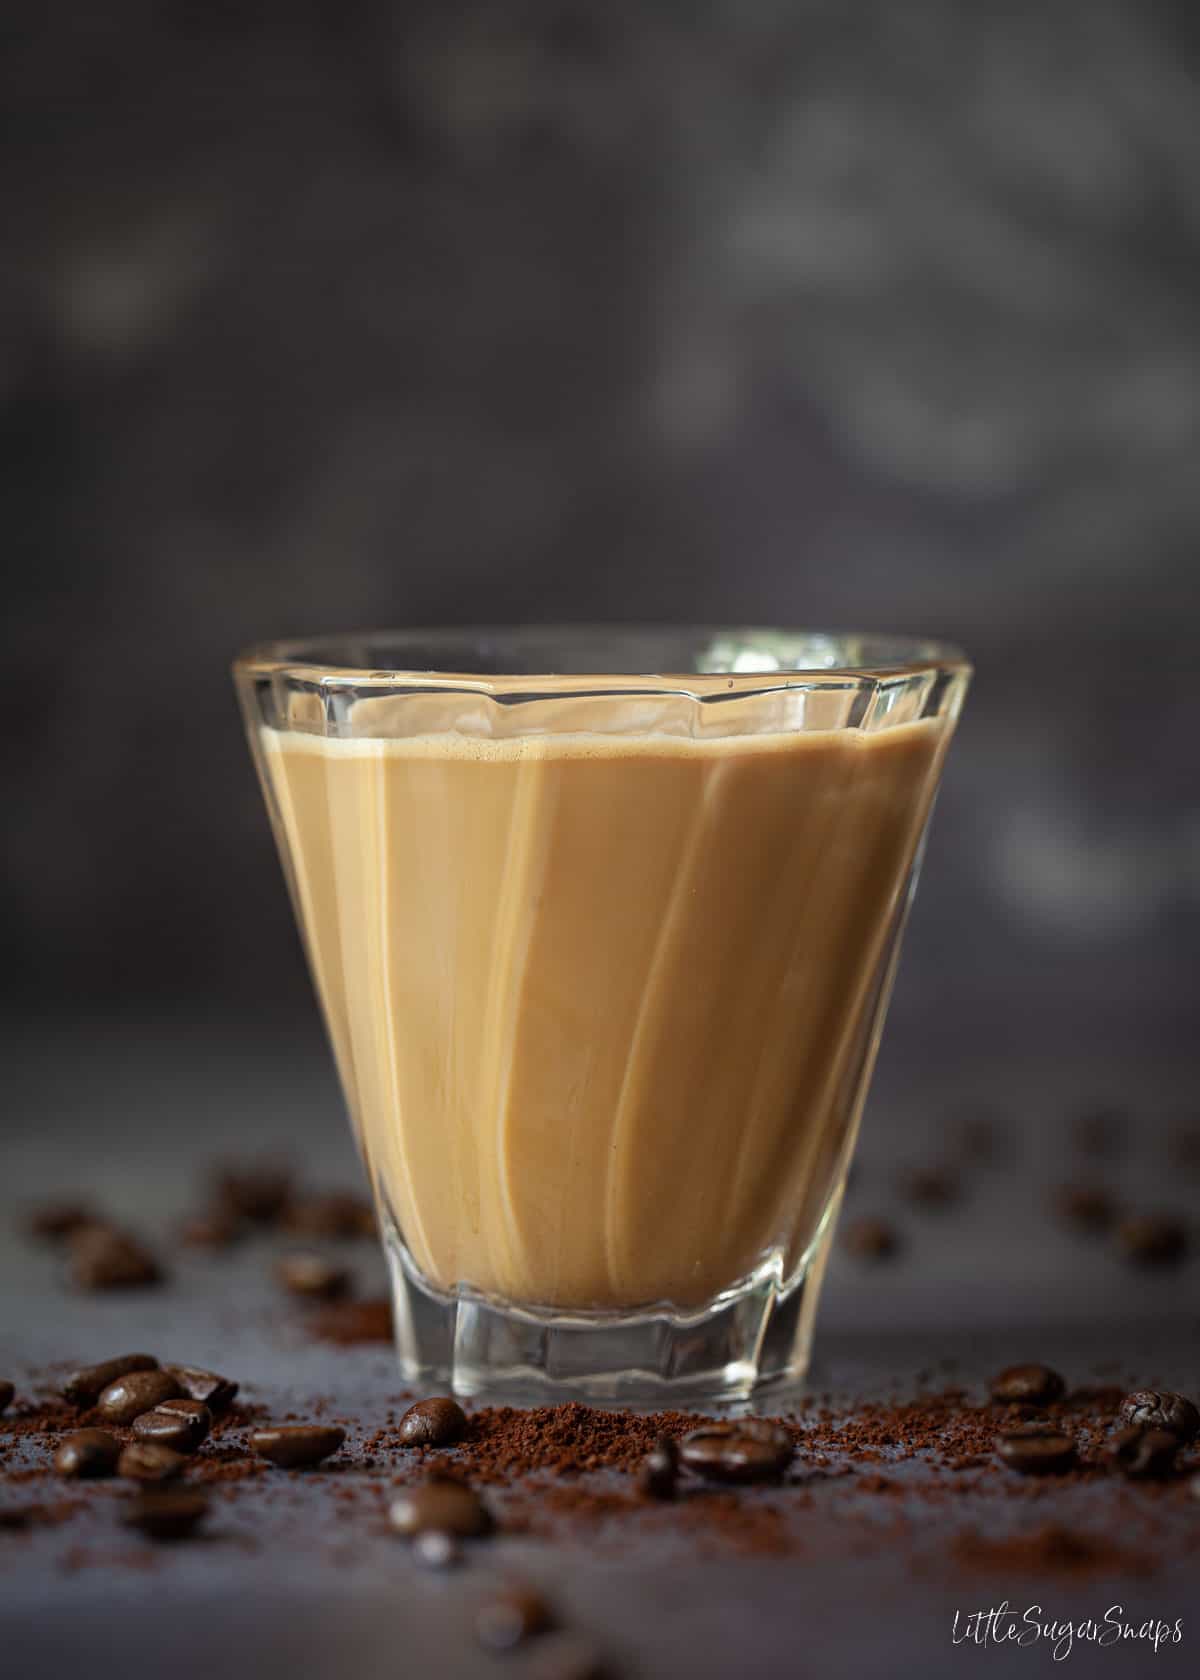 A single glass of Spanish latte surrounded by coffee beans.